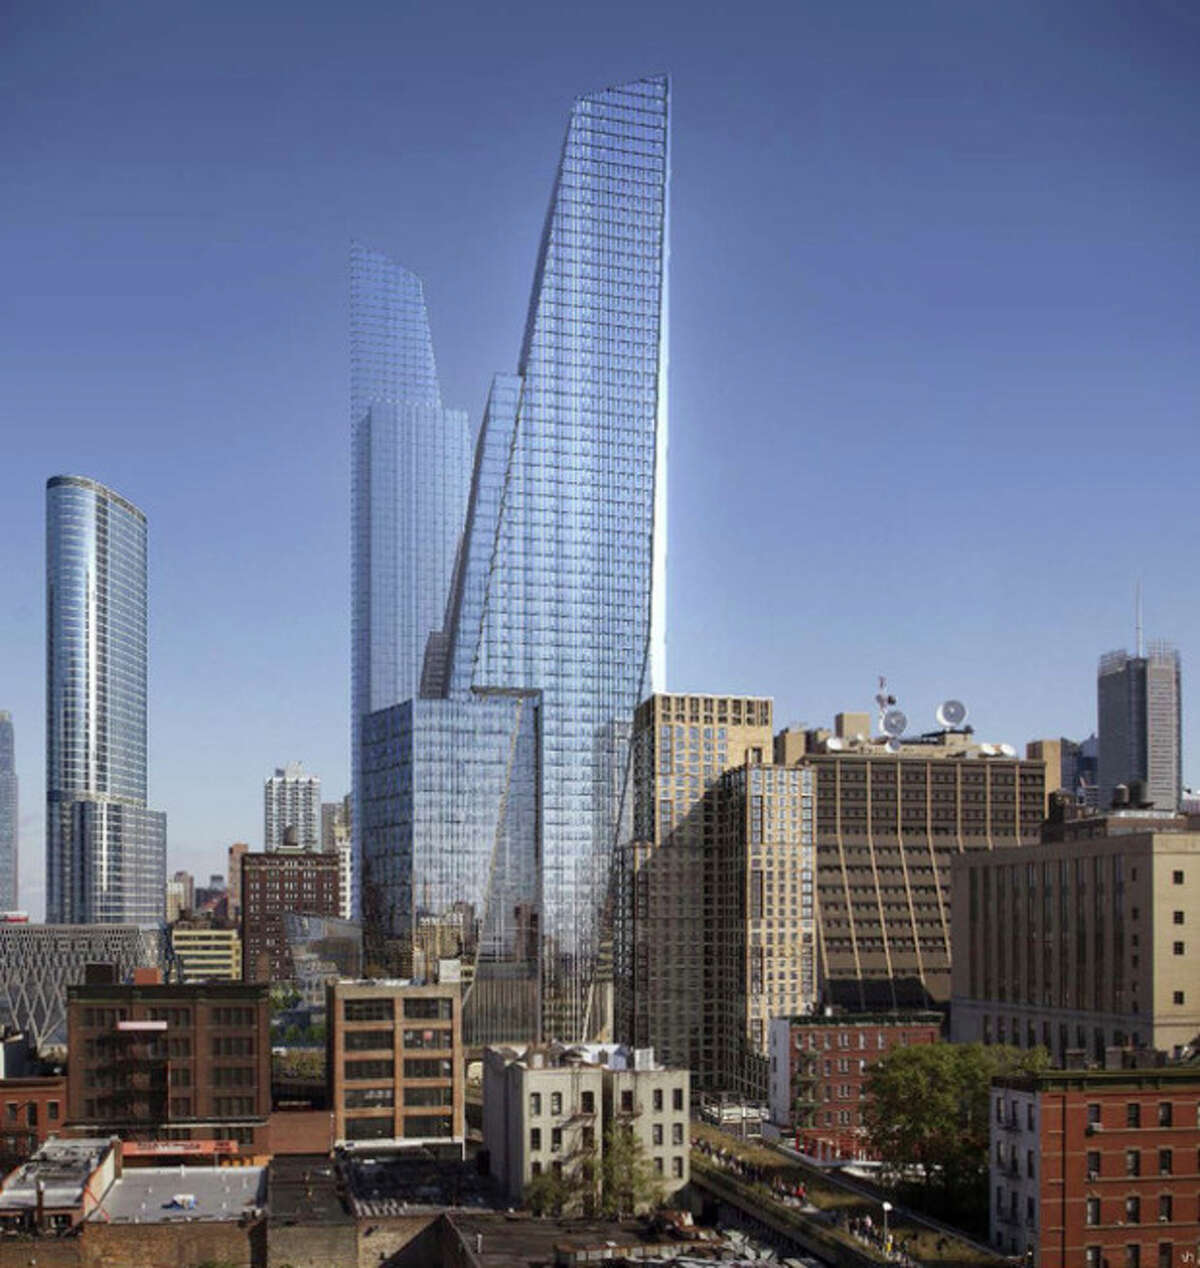 AP Photo/Visualhouse via Related Companies This artist's rendering provided by Visualhouse, via Related Companies, shows the planned Hudson Yards urban village, center, that will start rising soon on the acres of land overlooking the Hudson River.